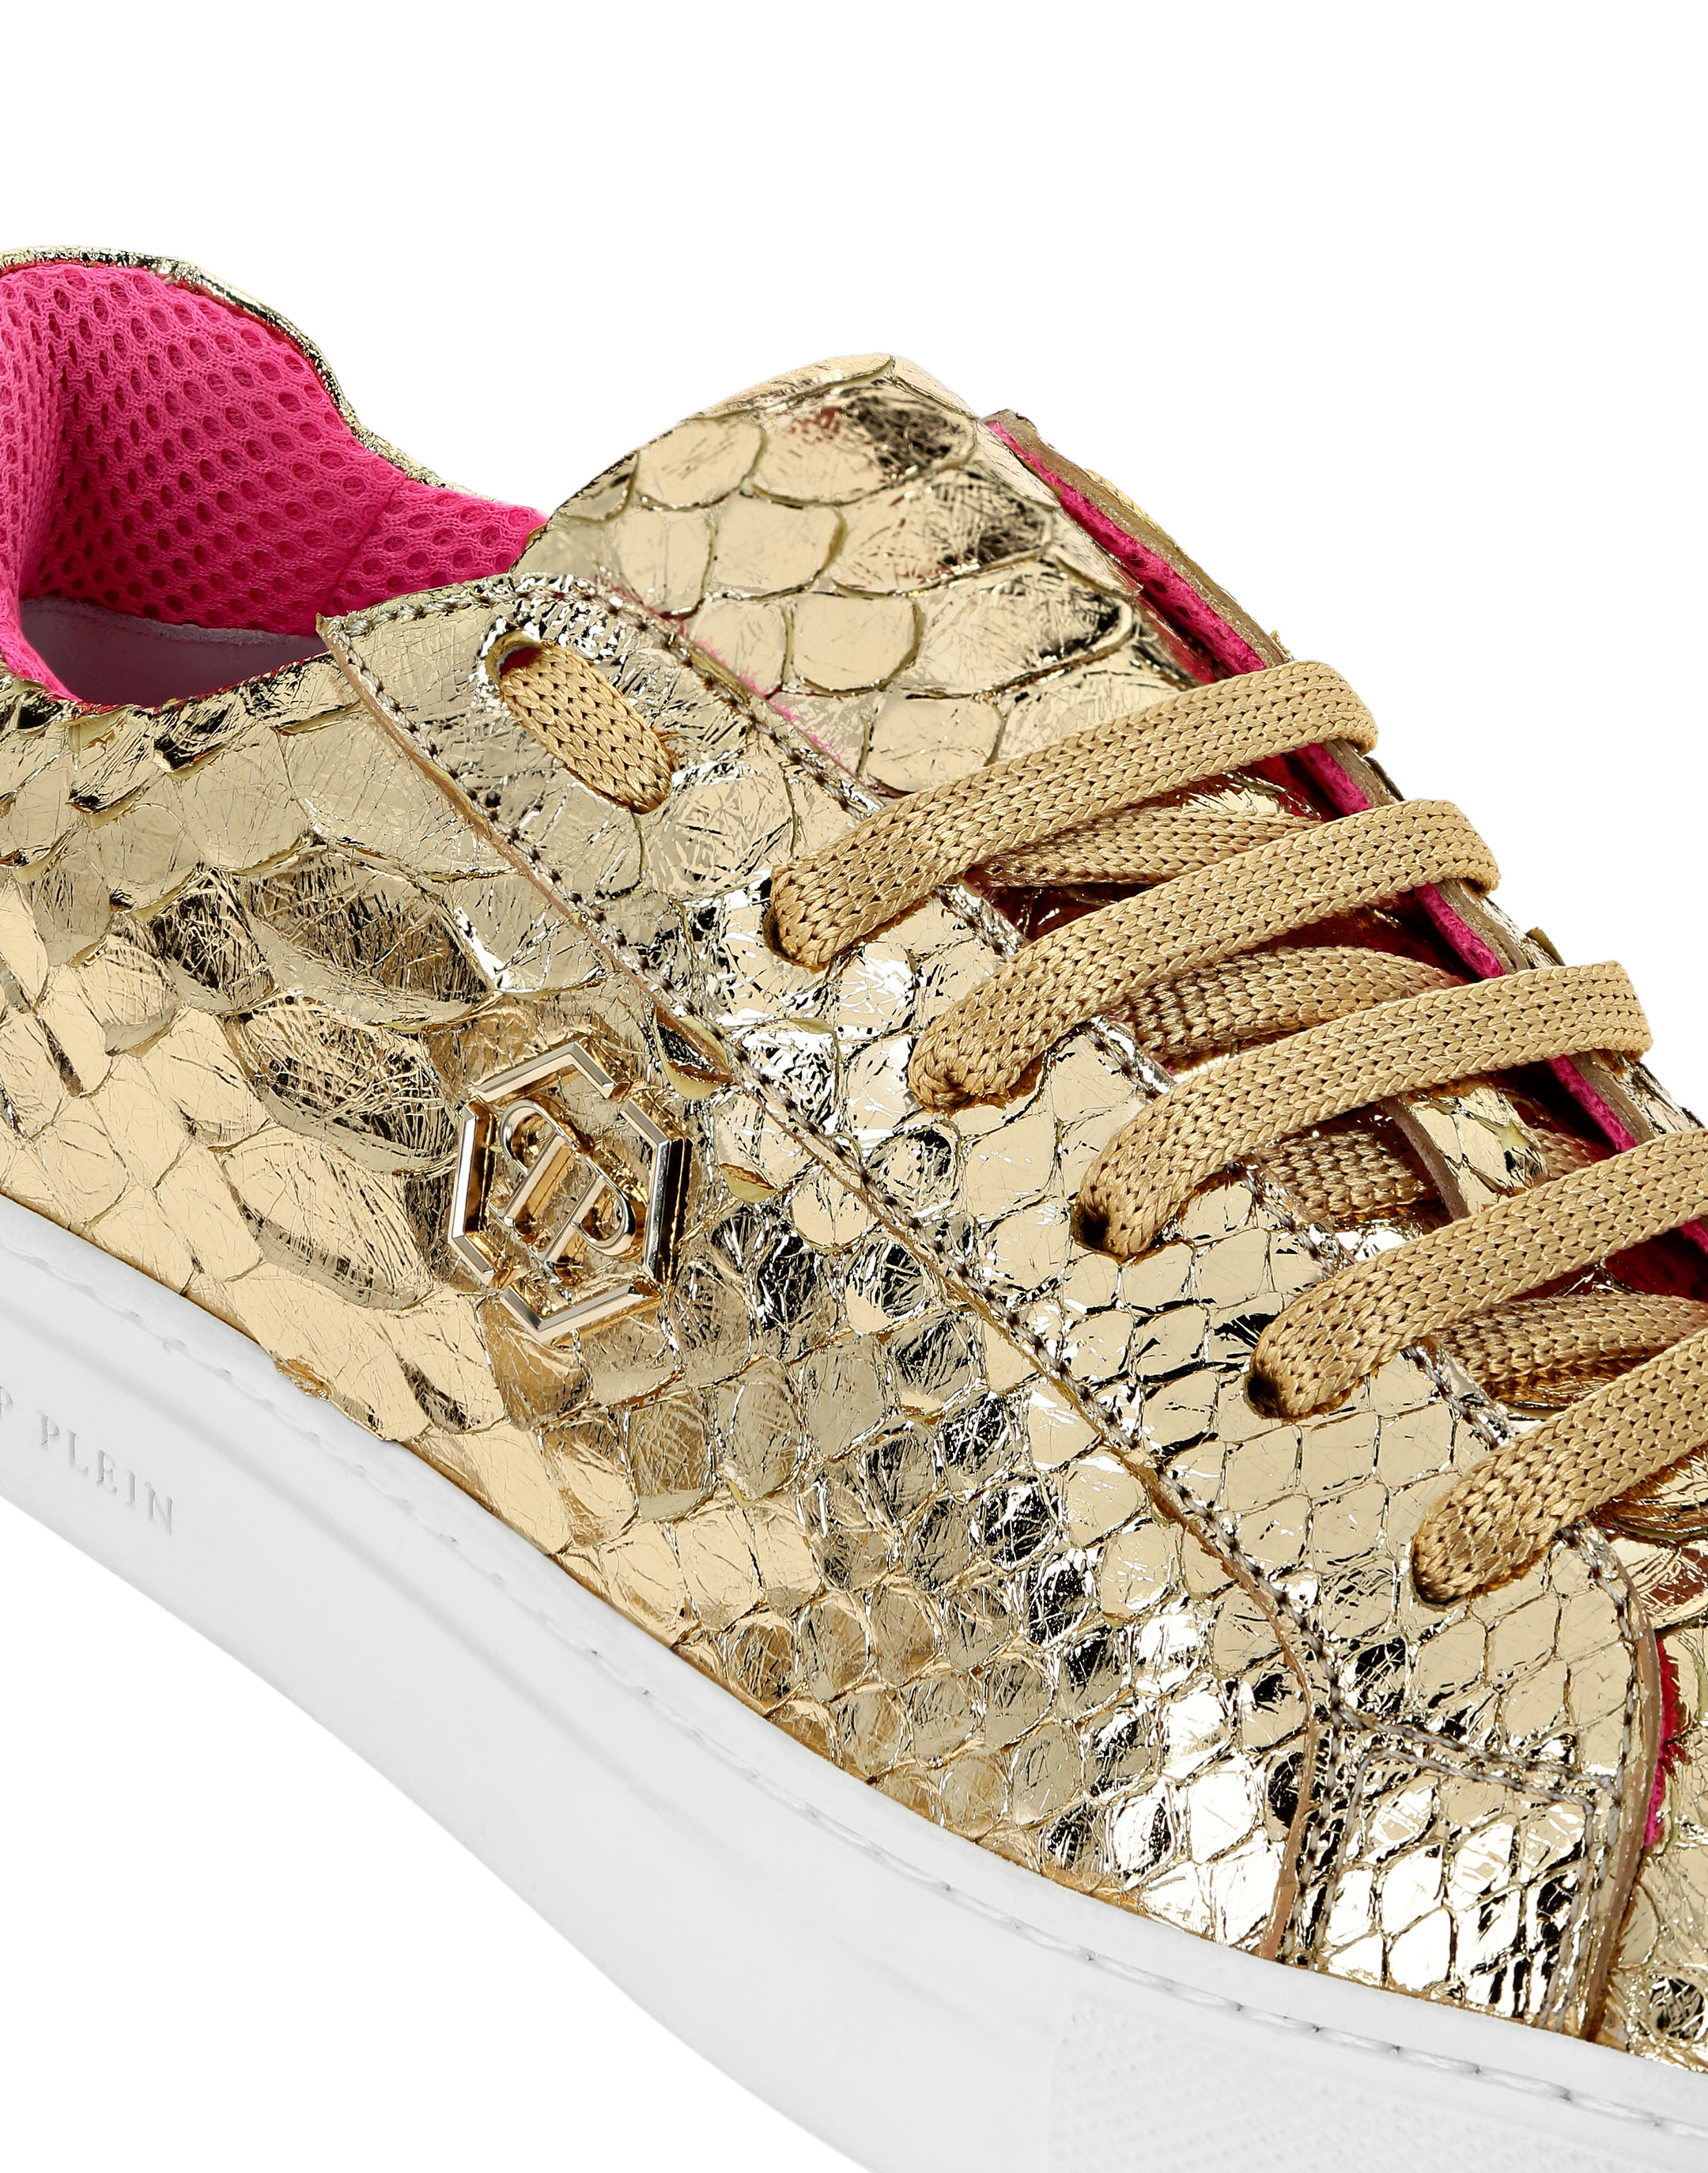 Python Lo-Top Sneakers Gold | Philipp Plein Outlet